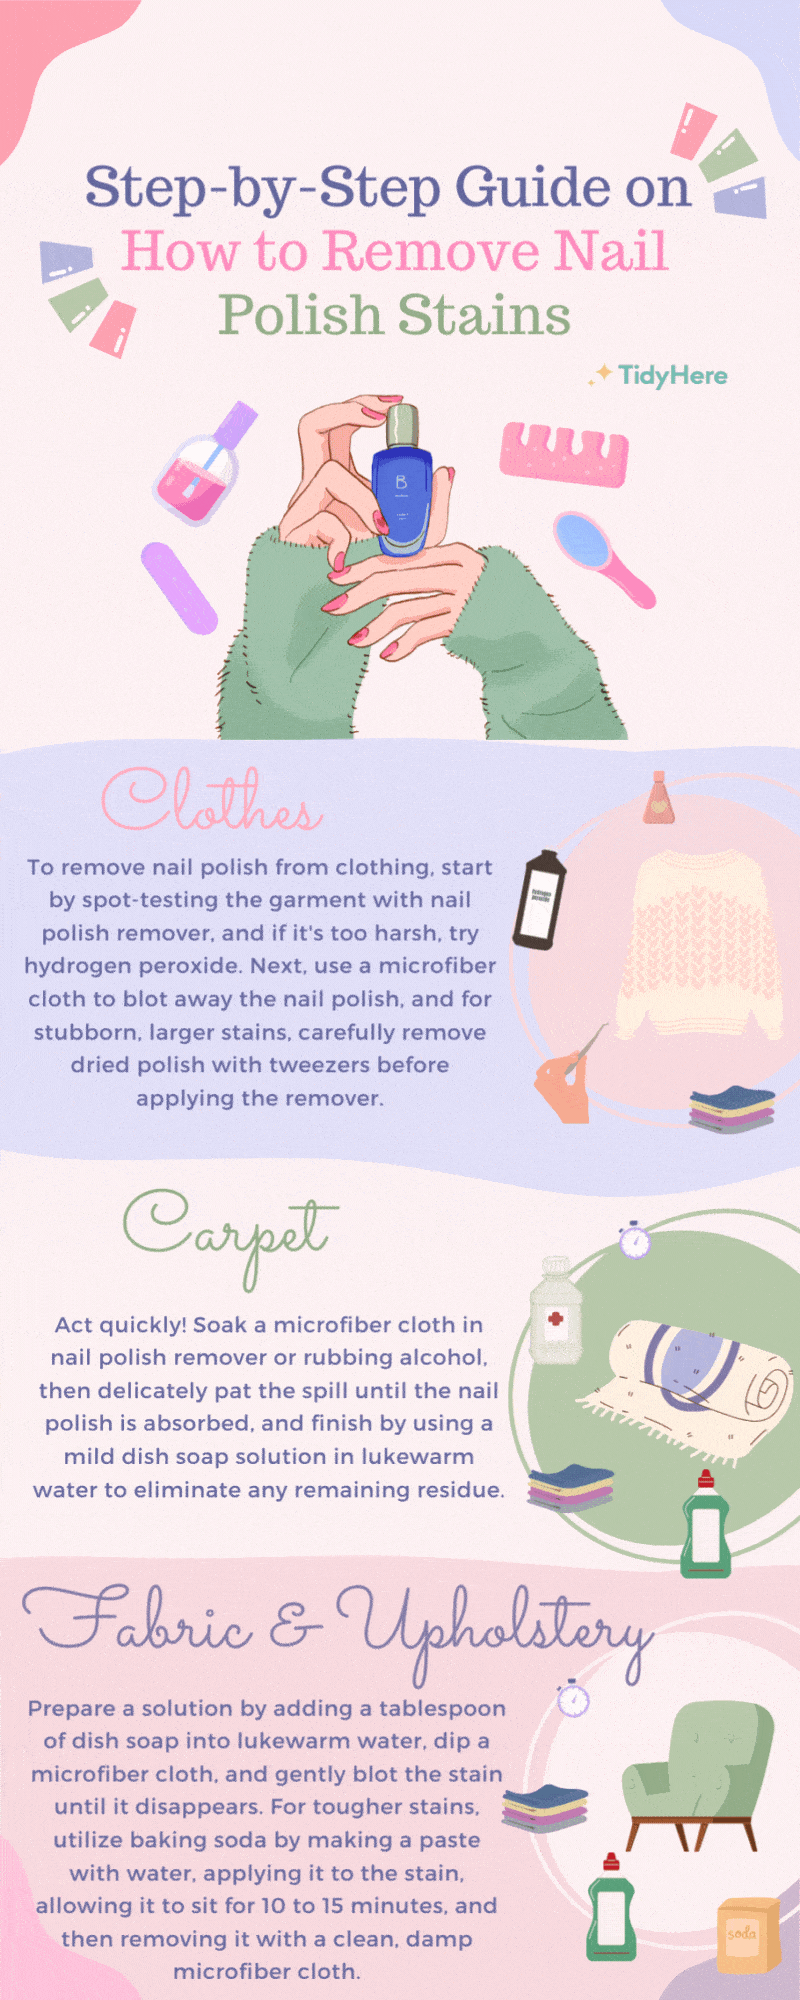 Step By Step Guide on How to Remove Nail Polish Stains Tidyhere Infographic